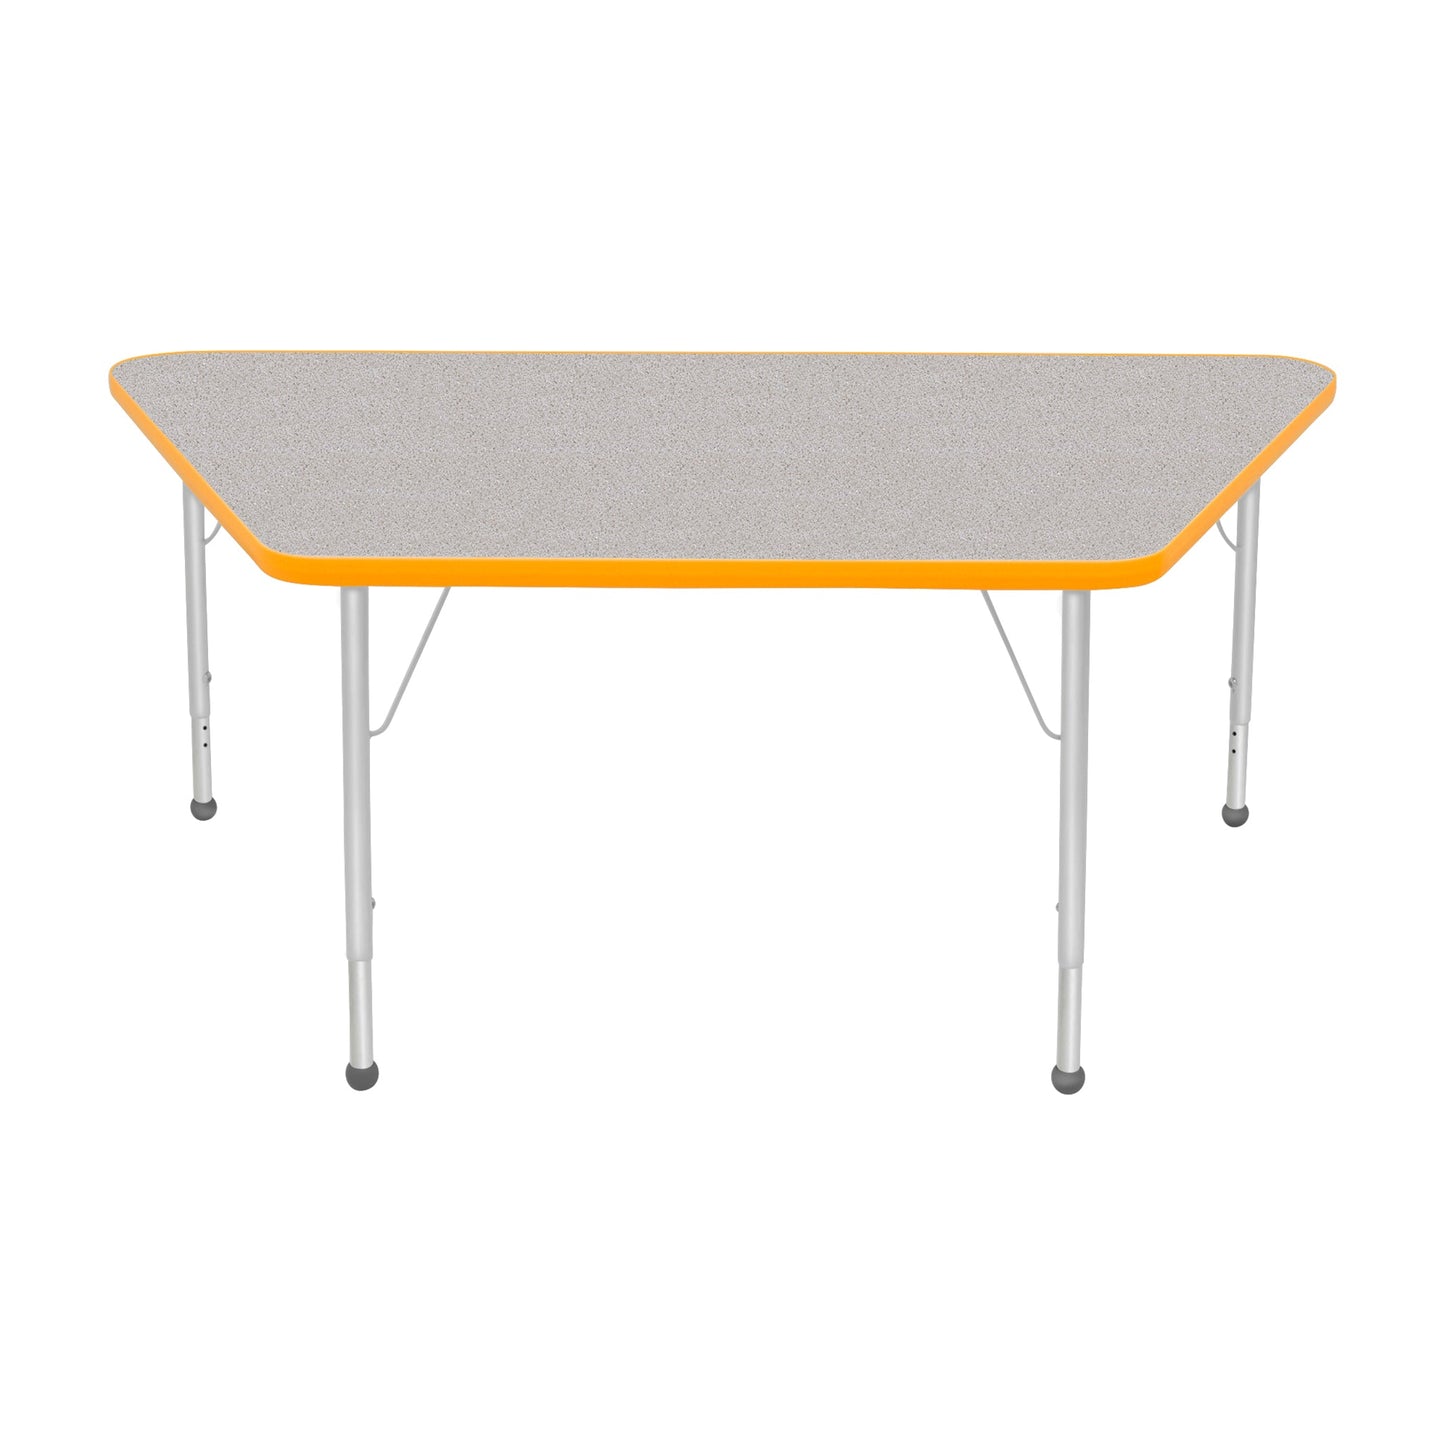 Mahar Creative Colors Large Trapezoid Creative Colors Activity Table with Heavy Duty Laminate Top (30"W x 60"L x 22-30"H) - SchoolOutlet